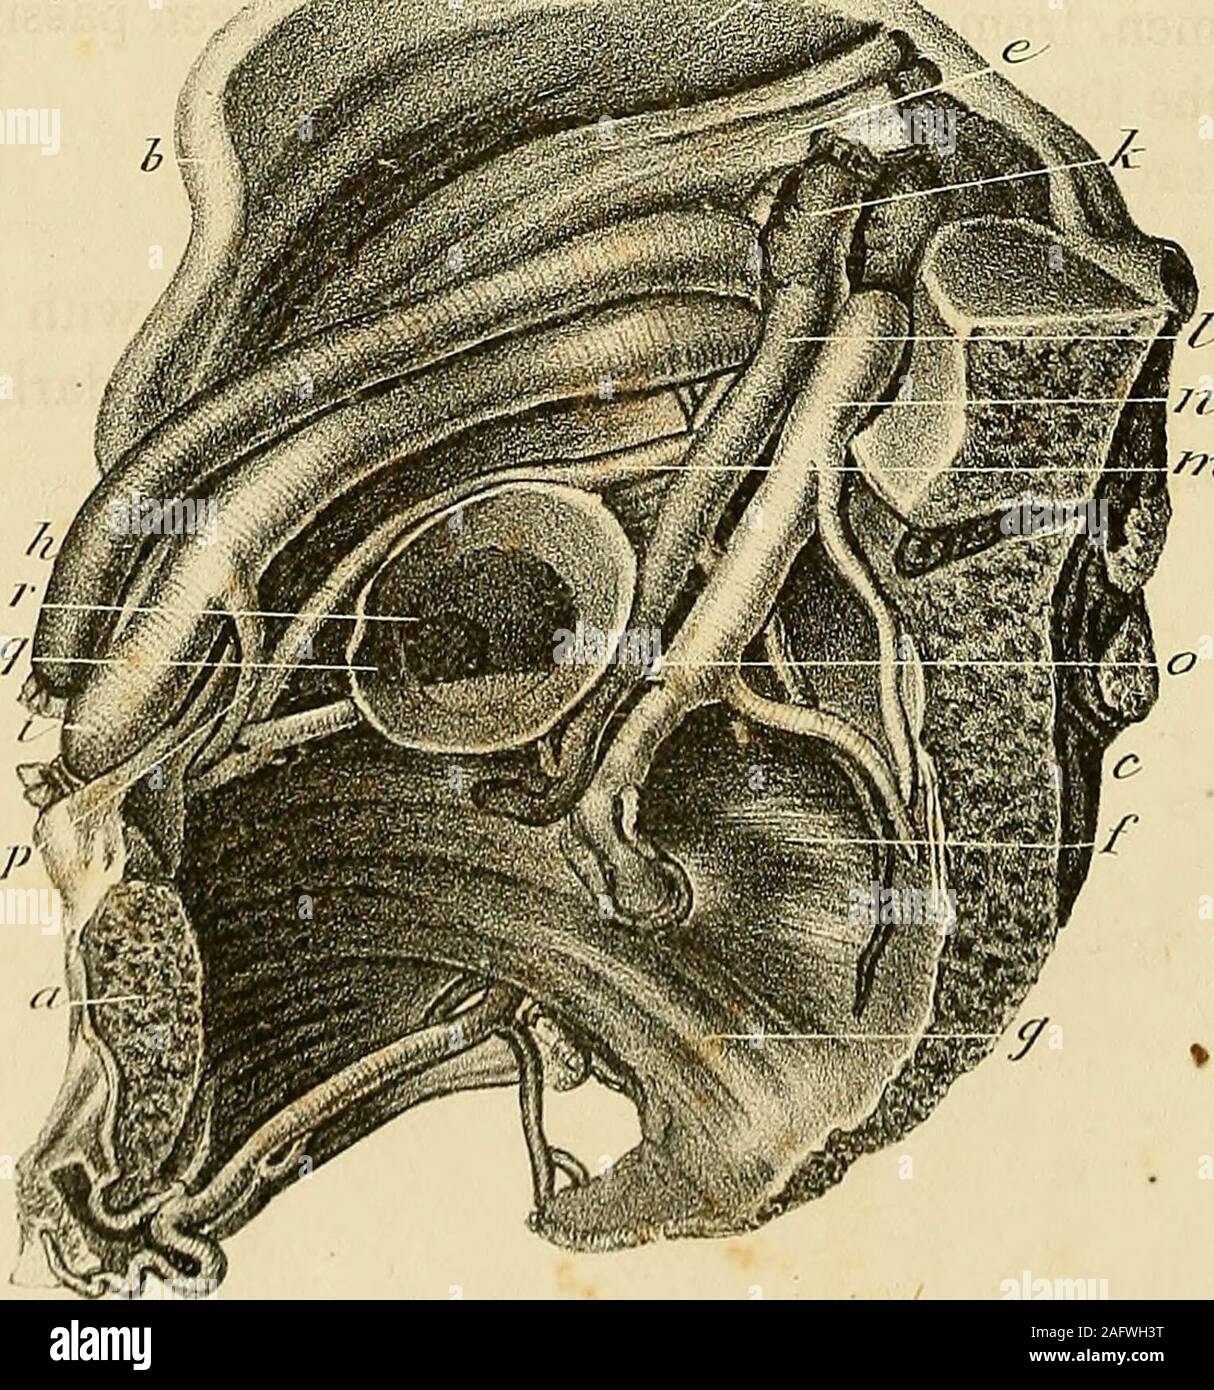 . The anatomy and surgical treatment of abdominal hernia. &??* d. &gt; fjn-^dcl SmcZnu s Iiitii PLATE XX III.—Fig. 1. Gives an internal view of the ischiatic hernia, from Dr. Joness patient.The preparation is in the anatomical collection at Saint Thomass Hos-pital. a. Section of the pubes. b. Spinous process of the ilium. c. Sacrum. d. Iliacus internus muscle. e. Psoas muscle. /. Pyriformis muscle. g. Coccygeus muscle. h. Termination of the external iliac artery in the crural. i. Beginning of the crural vein. k. Trunk of the common iliac artery. /. Internal iliac artery. m. Obturator artery, w Stock Photo